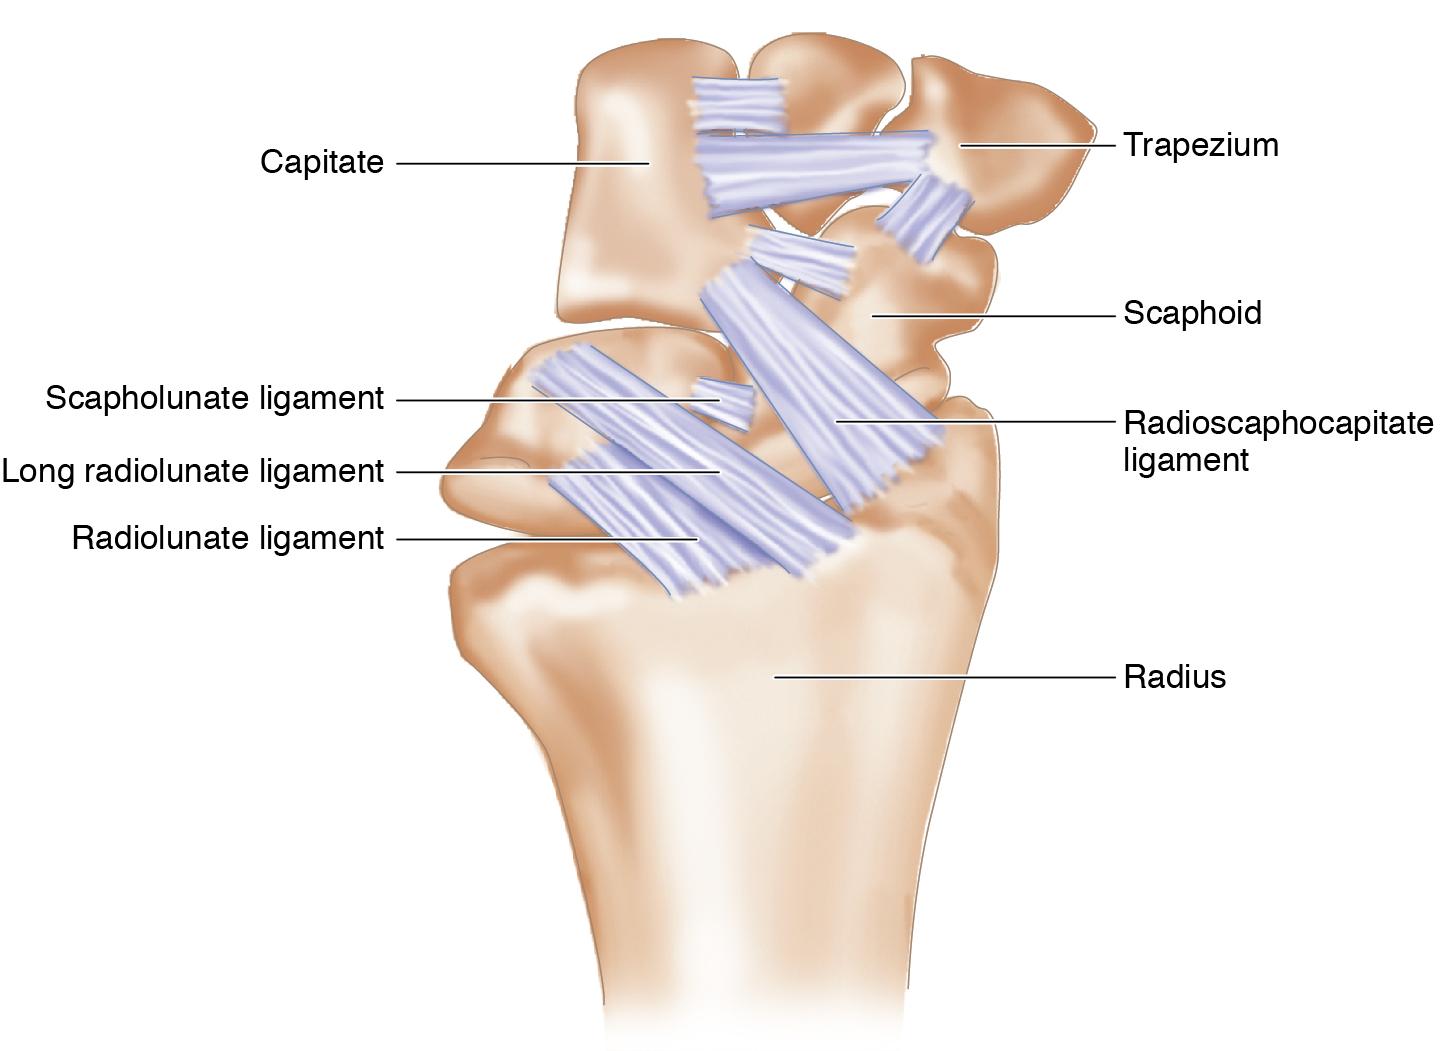 FIGURE 25.9, Ligamentous anatomy of the scaphoid.